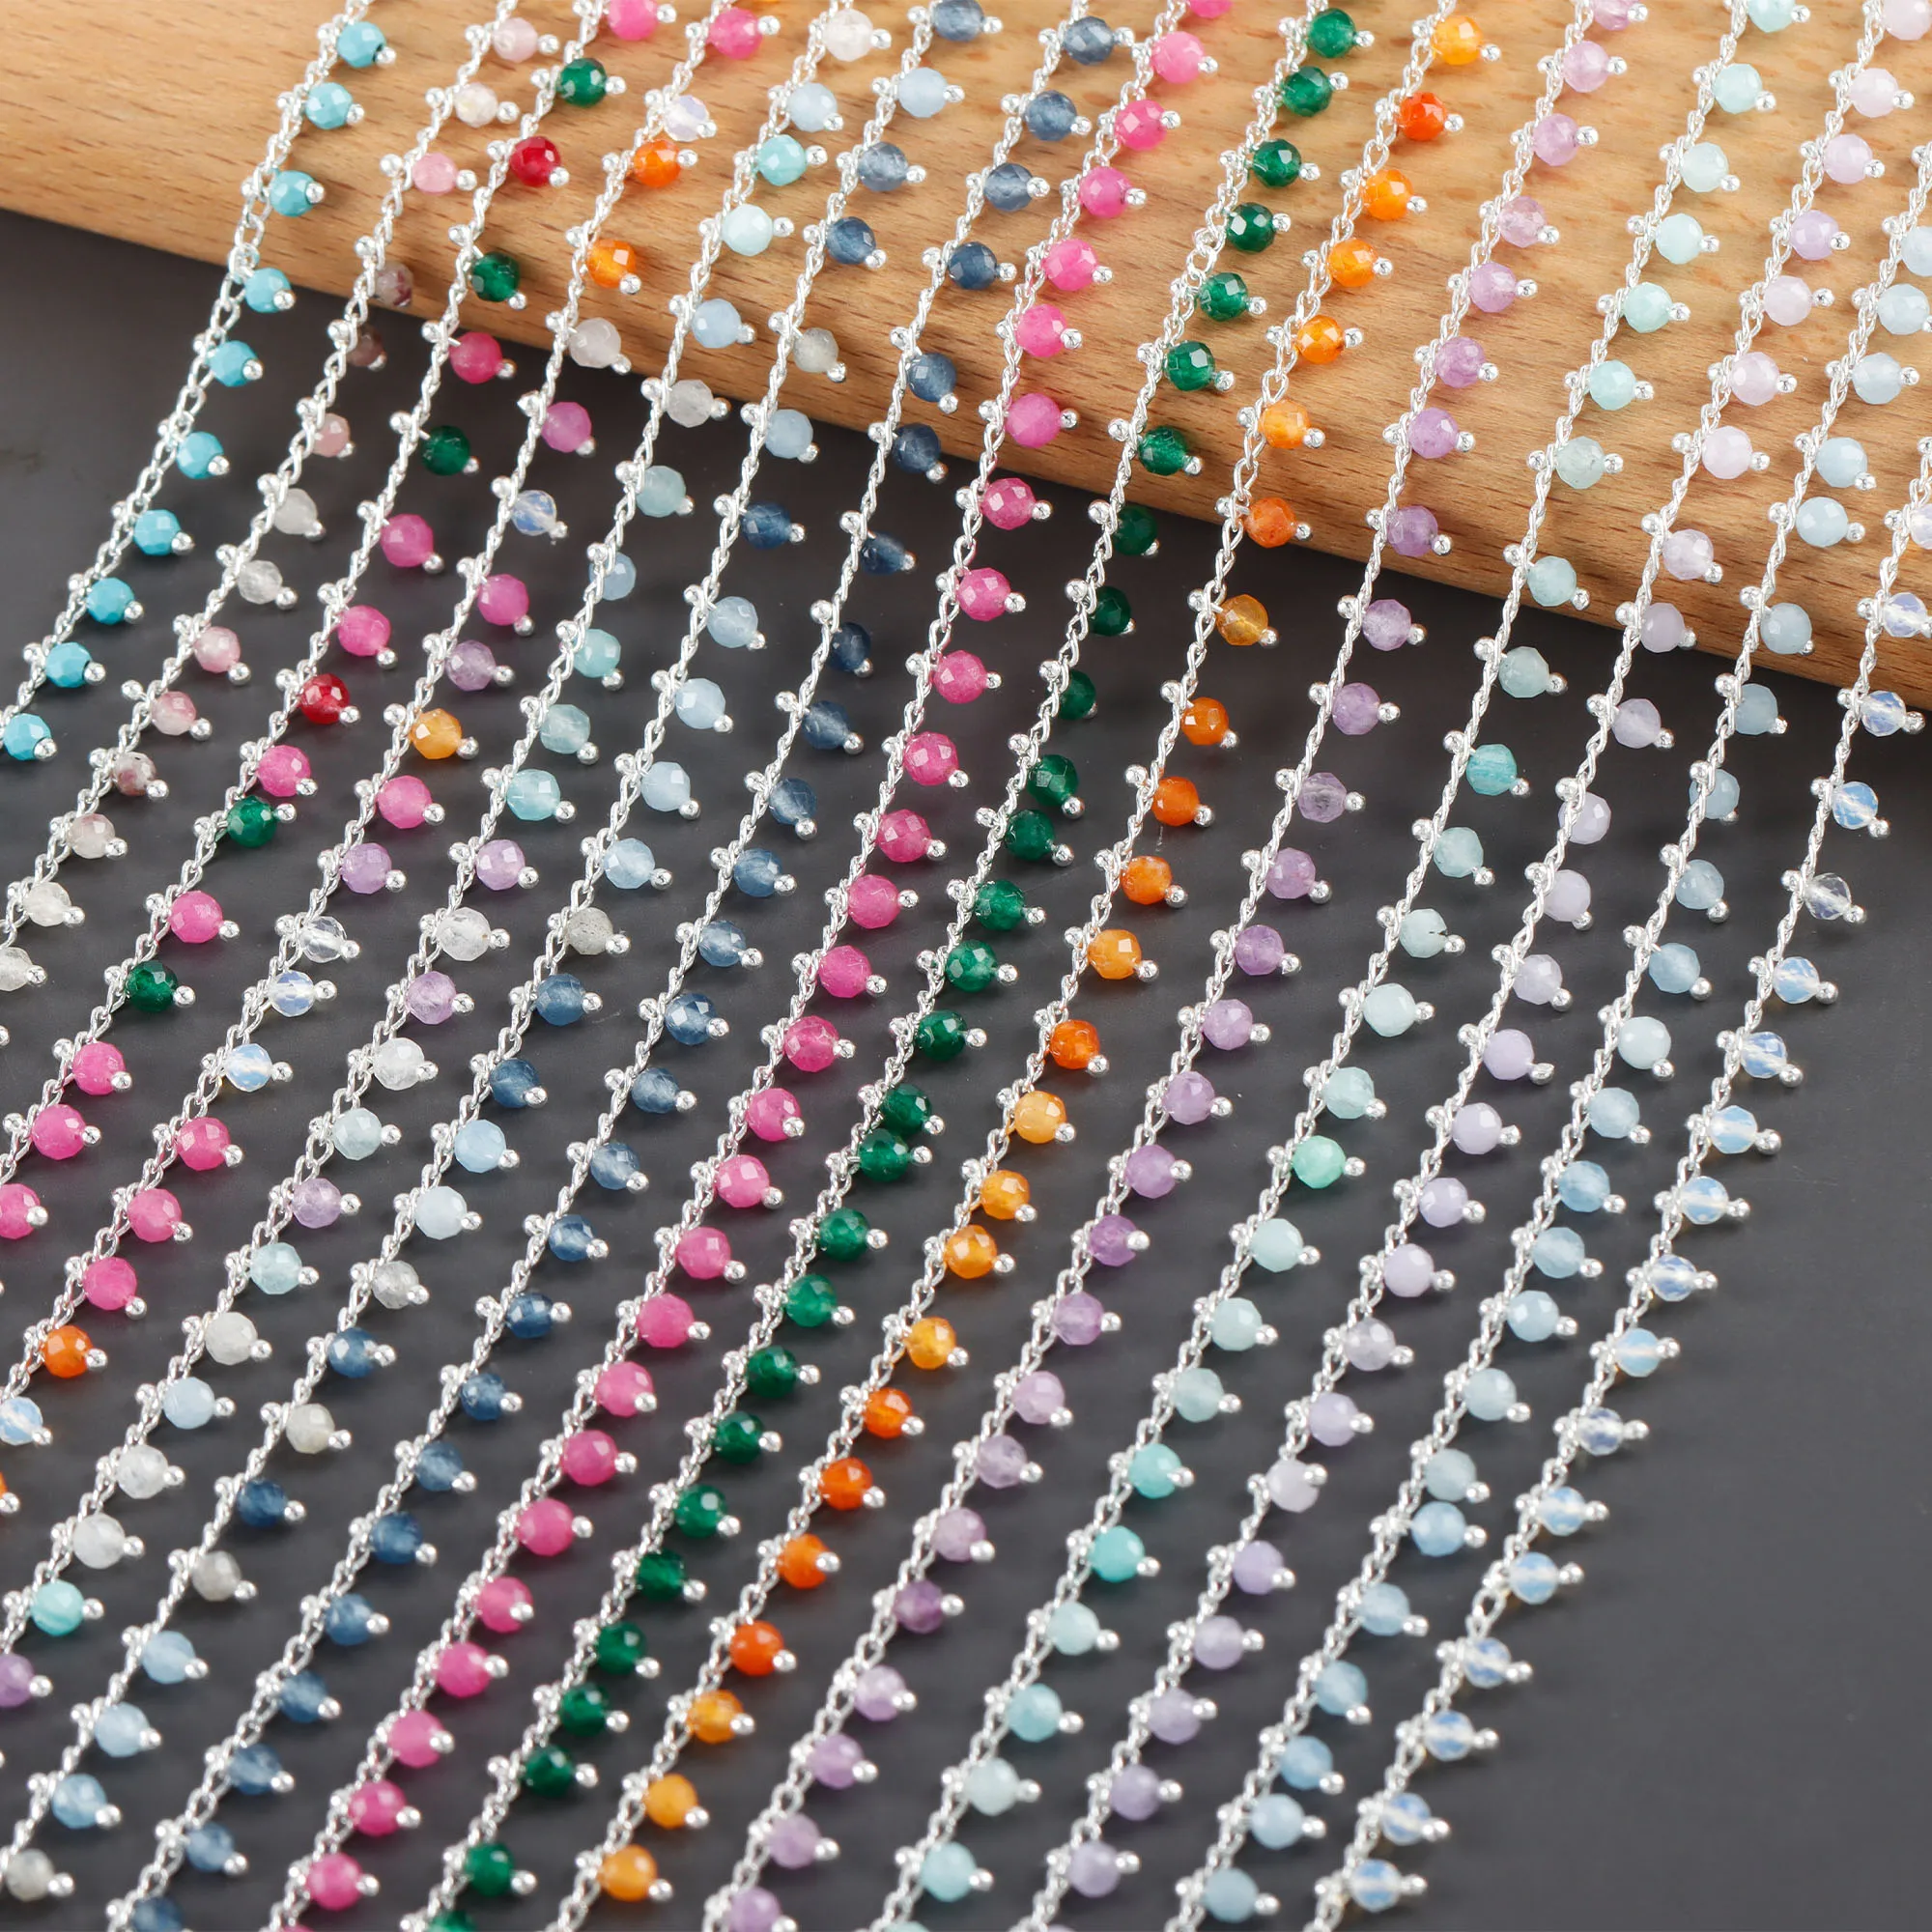 

Colorful Natural Stone Metal Diy Chain Necklace Bracelet For Women Jewelry Making Accessories C240 1m/lot, Picture shown